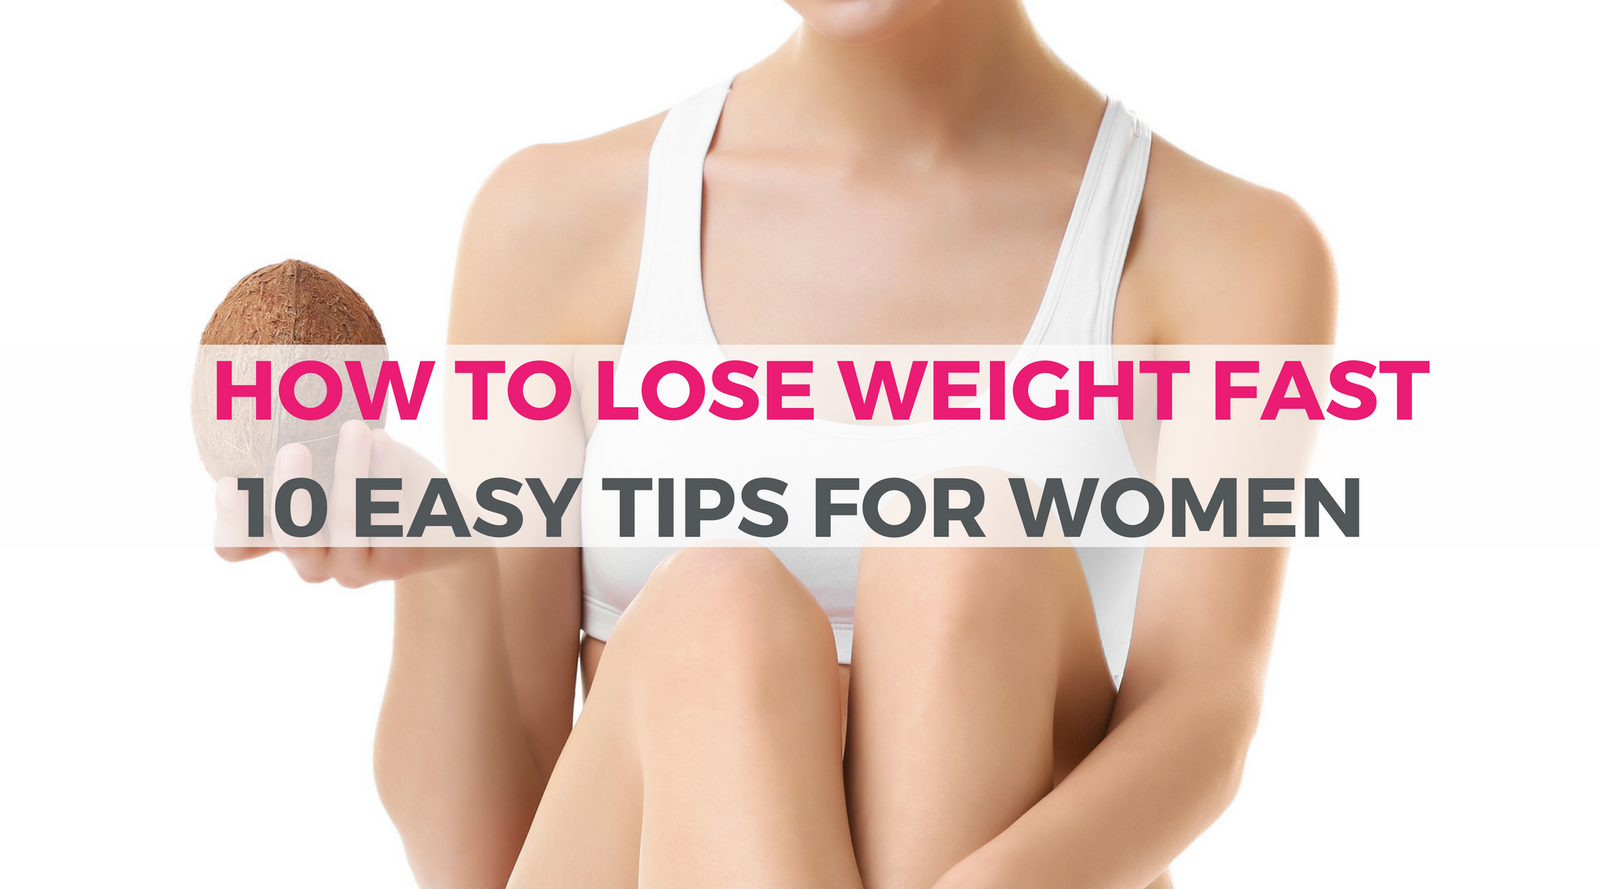 How To Lose Weight Fast In 1 Week 10